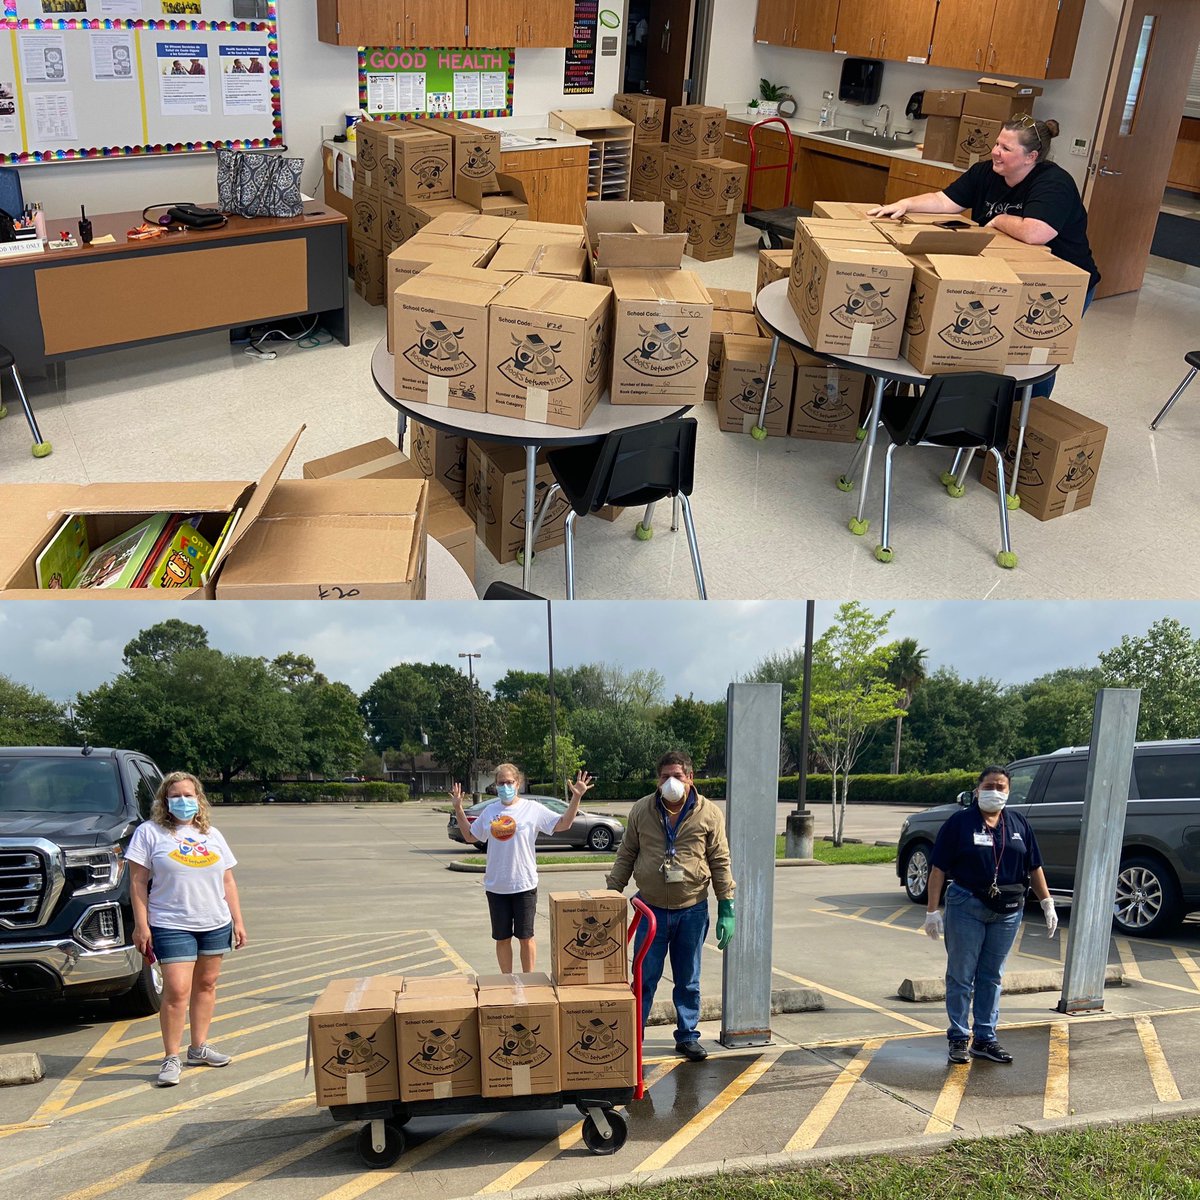 Extended learning time @Neff_ES just got better thanks to @BooksBtnKids for delivering our books . Details on distribution will be sent soon .@HISD_Wraparound @awingardneff @HMays_2018 #keepkidsreading @APMataHISD